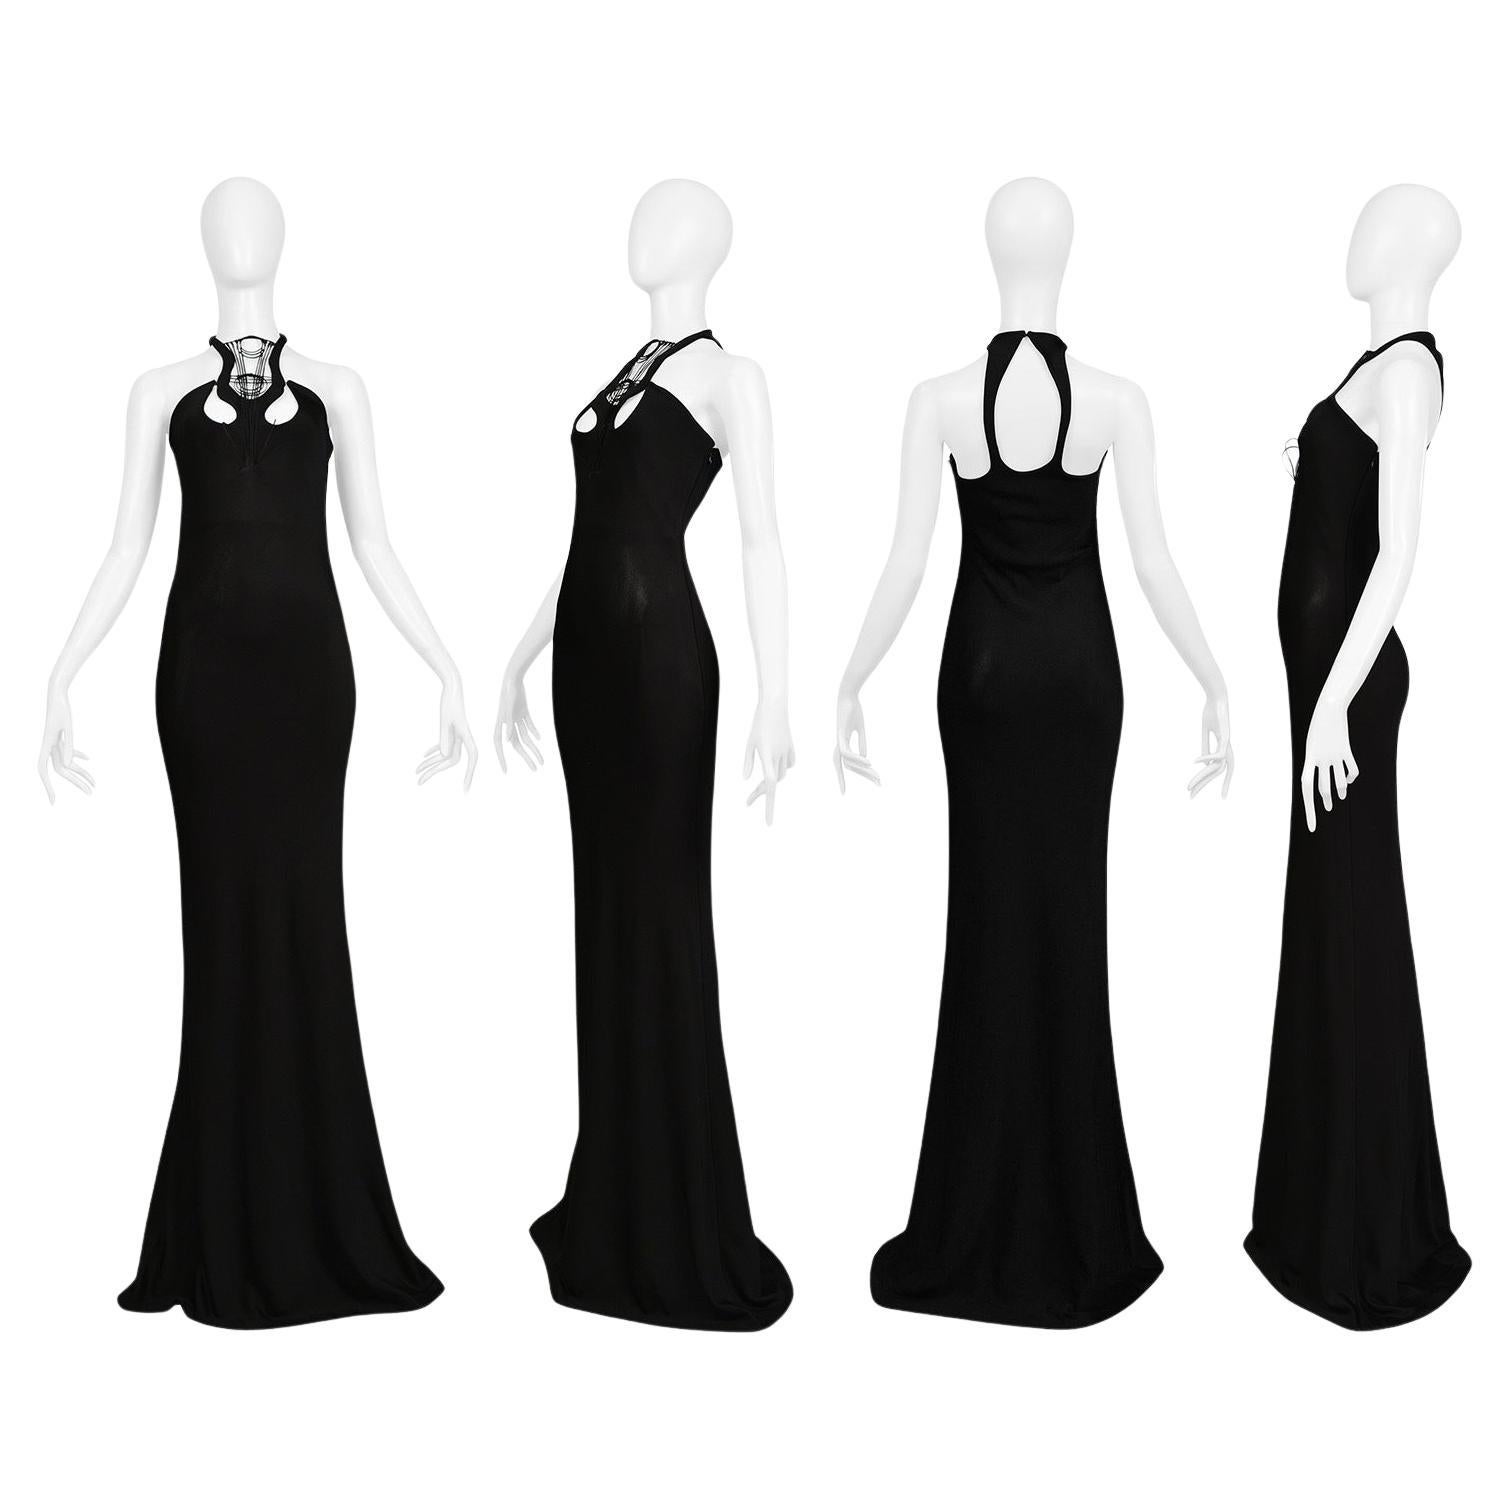 Sophia Kokosalaki Black Architectural Evening Gown With Intricate Bodice 2008 For Sale